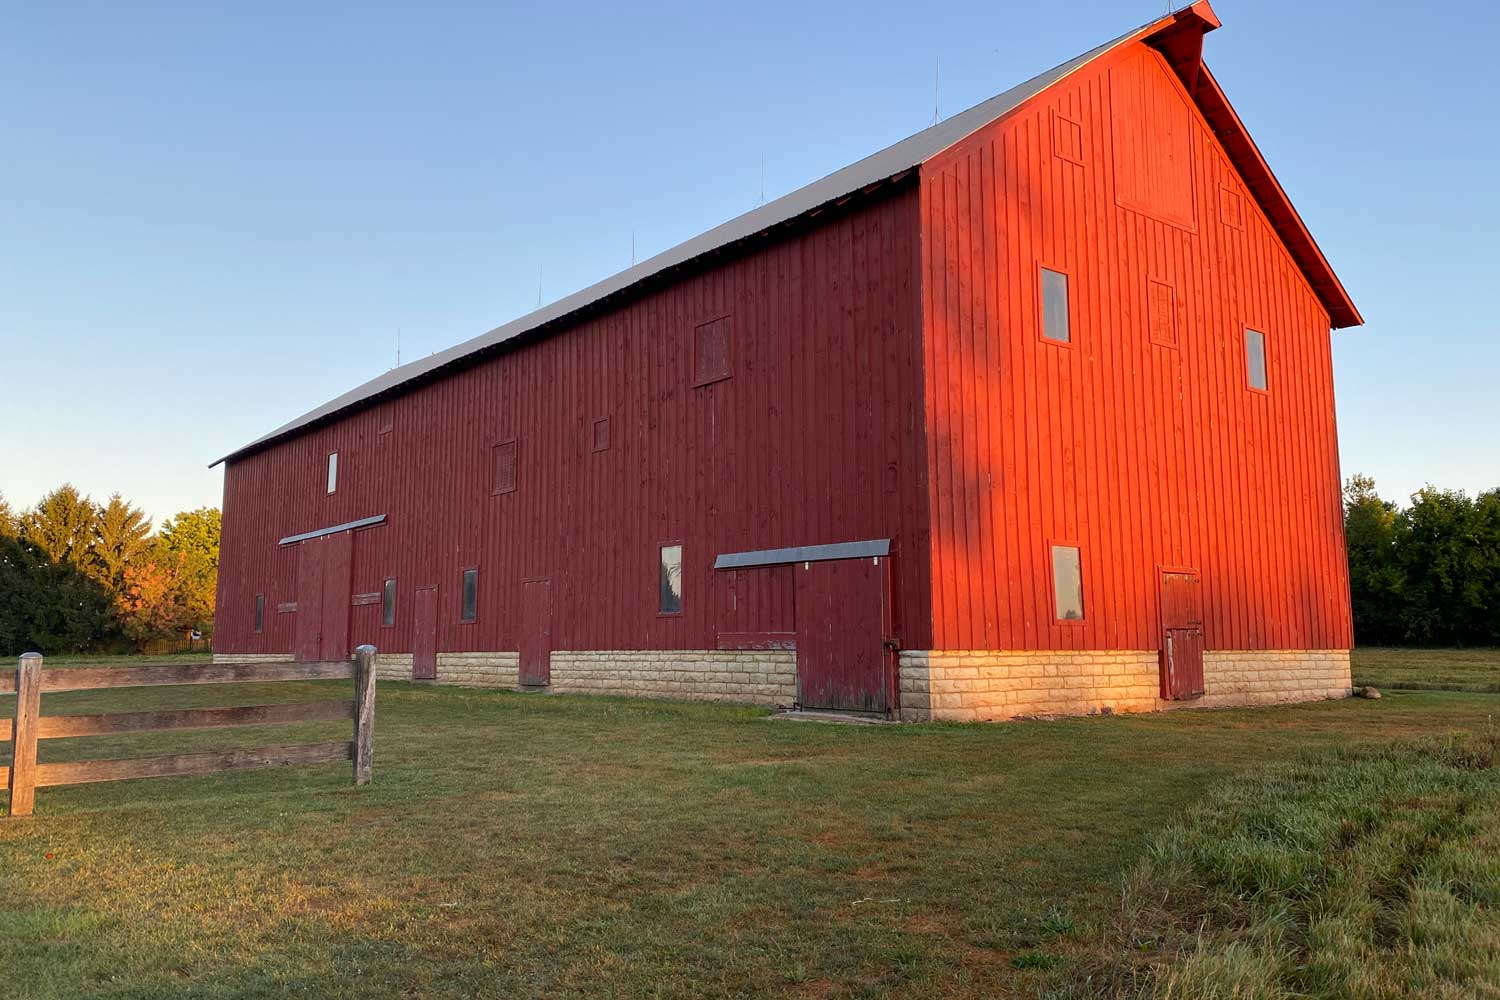 A large red barn in the glow of the setting sun.